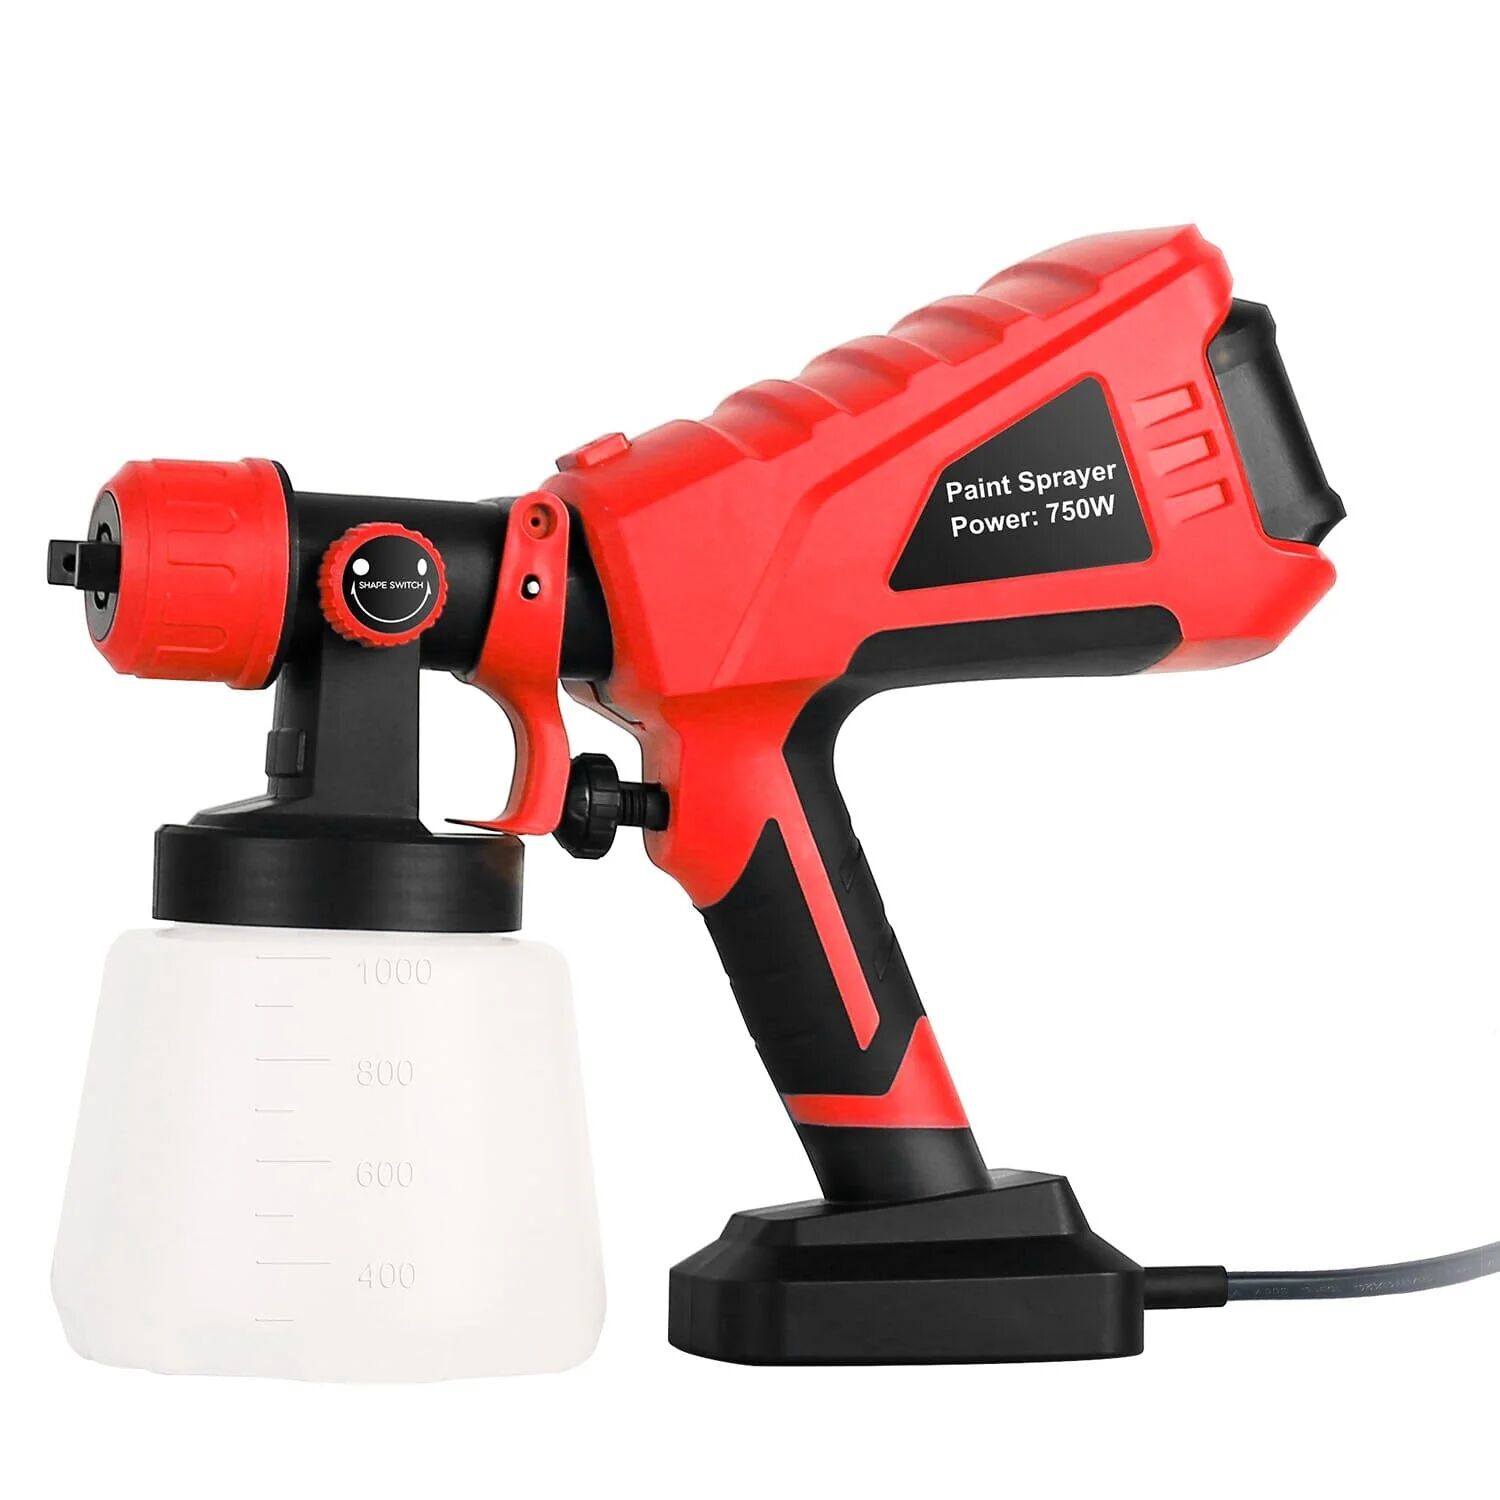 DailySale 750W Electric Paint Sprayer Handheld with 3 Spray Patterns